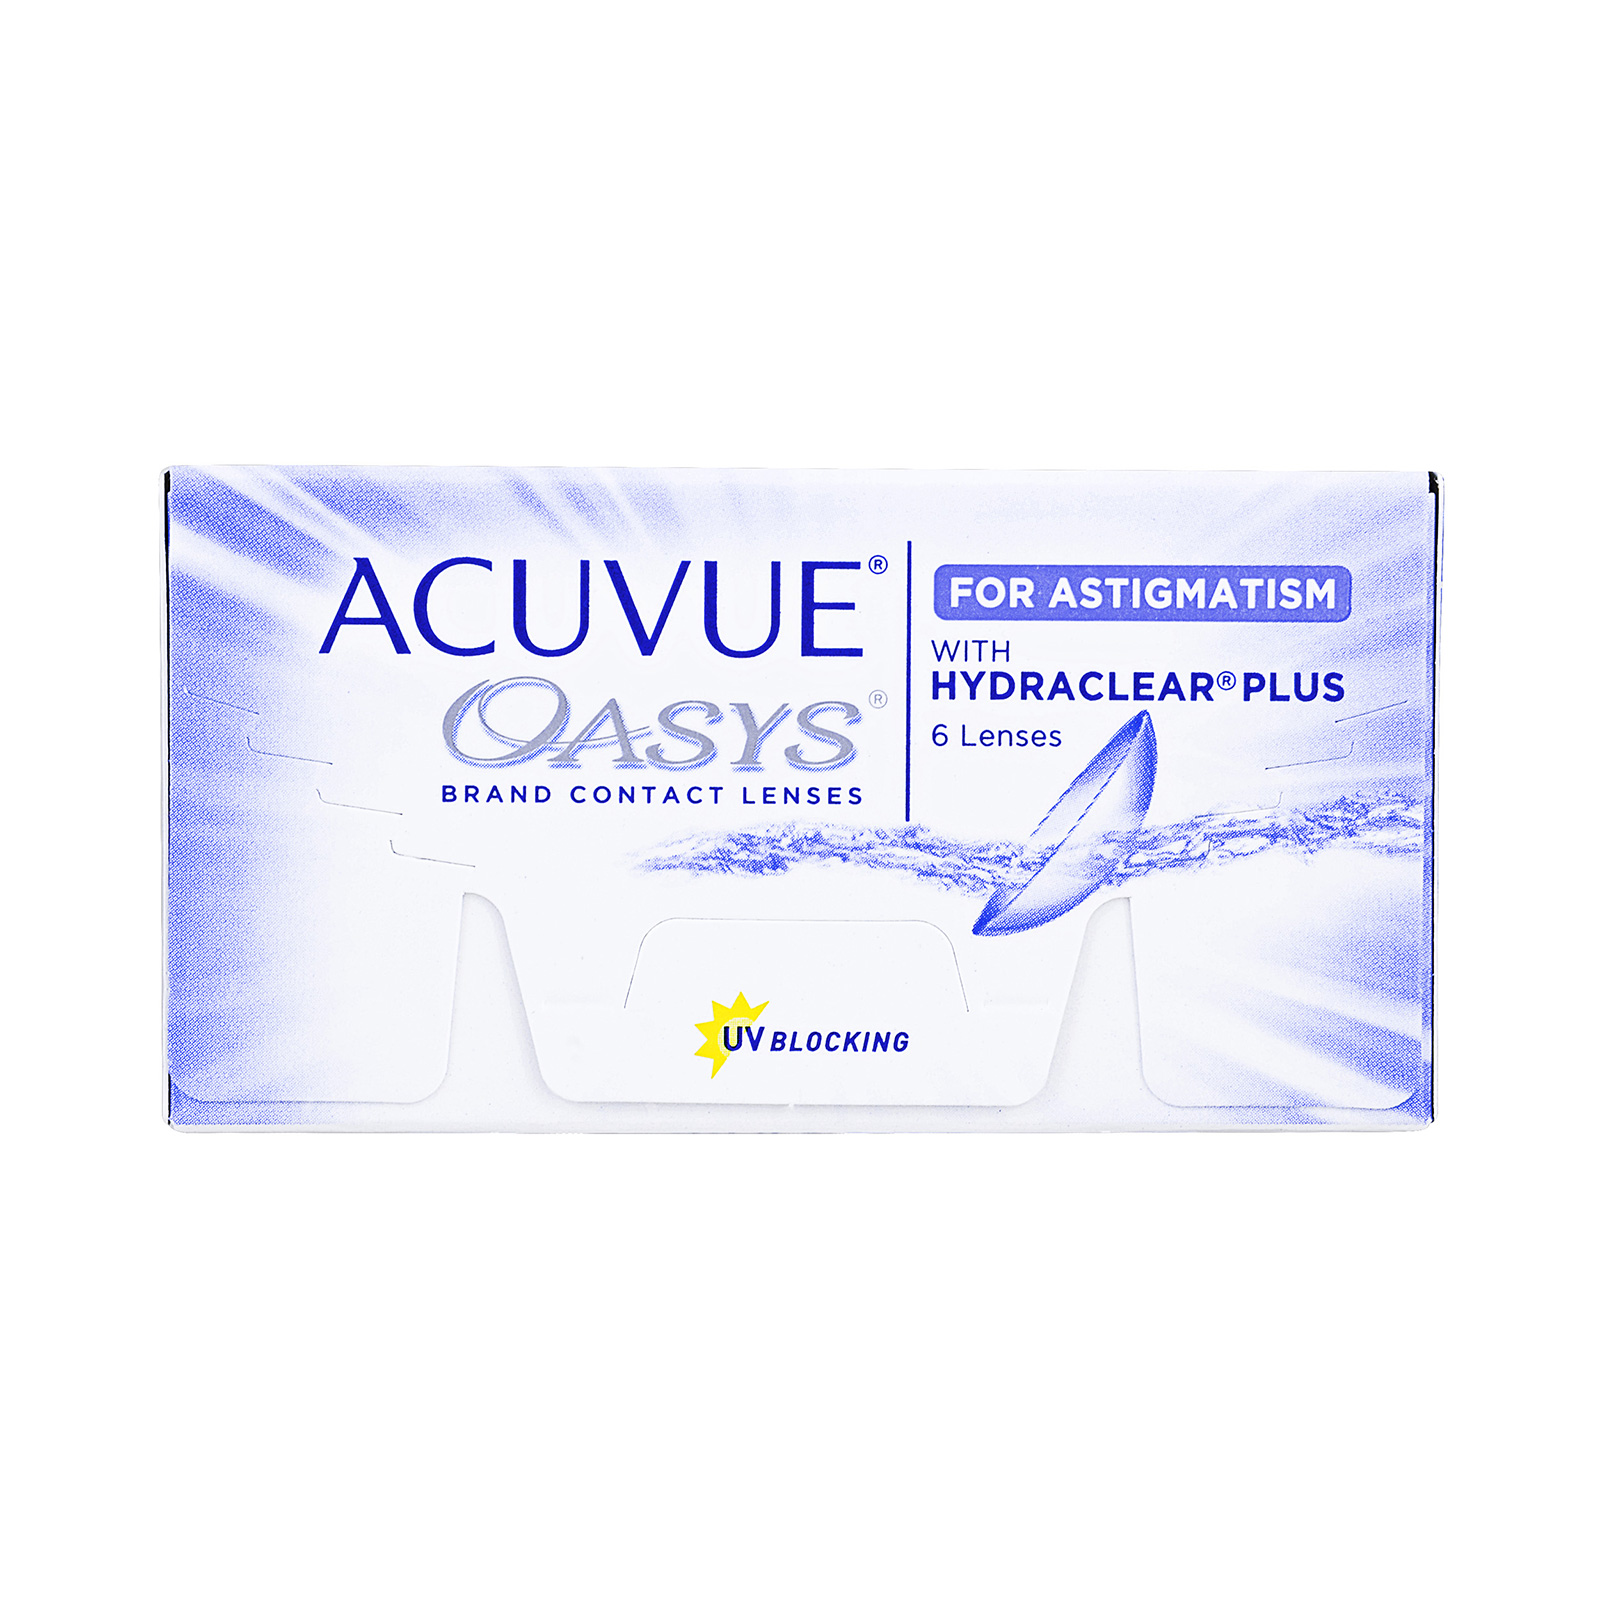 Acuvue Oasys 2-Week With HydraClear Plus for Astigmatism